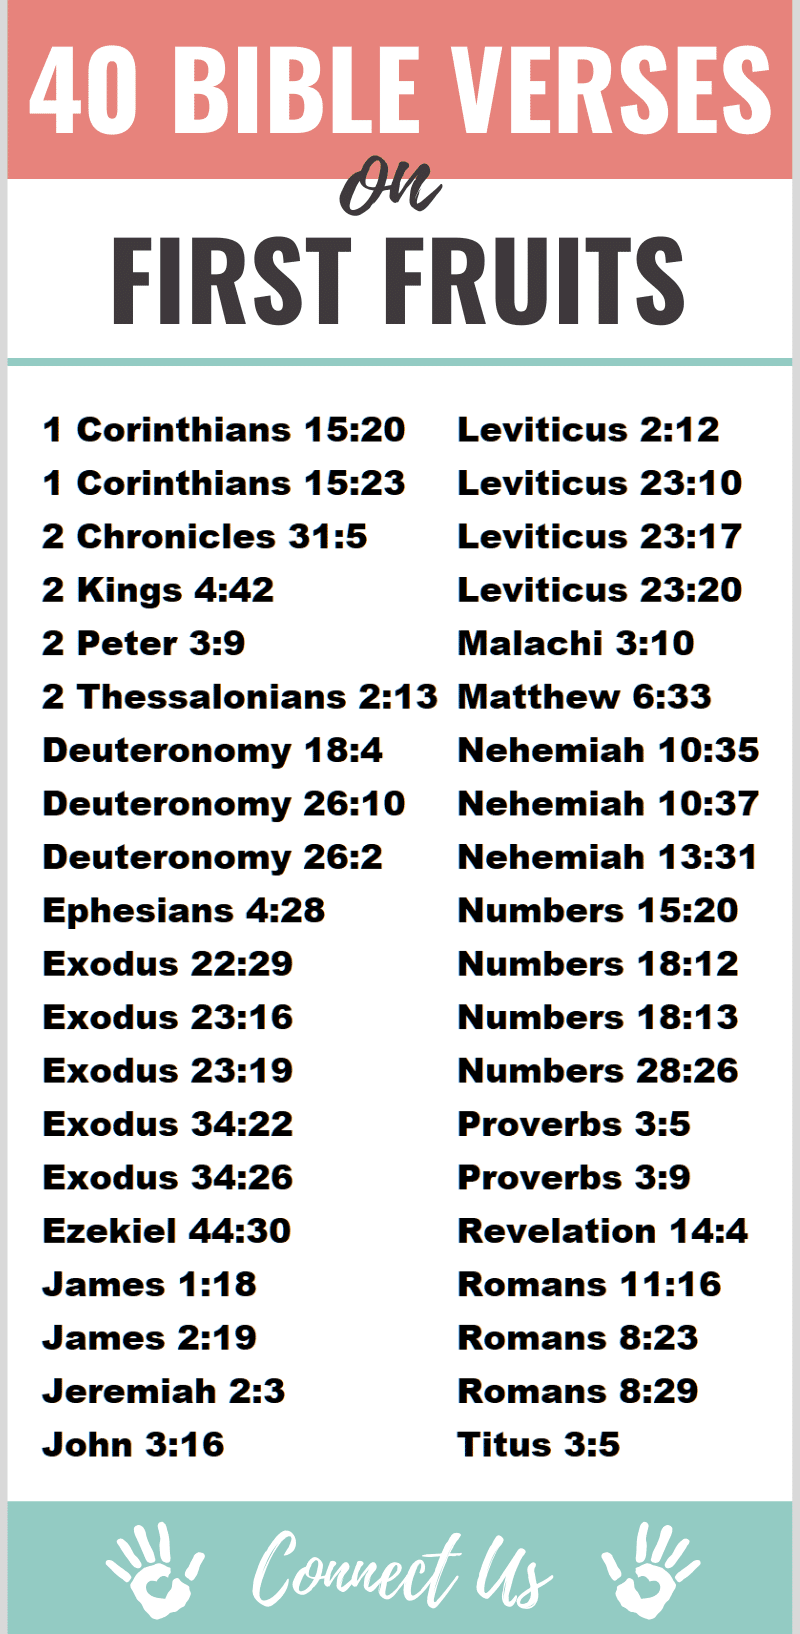 Bible Verses on First Fruits